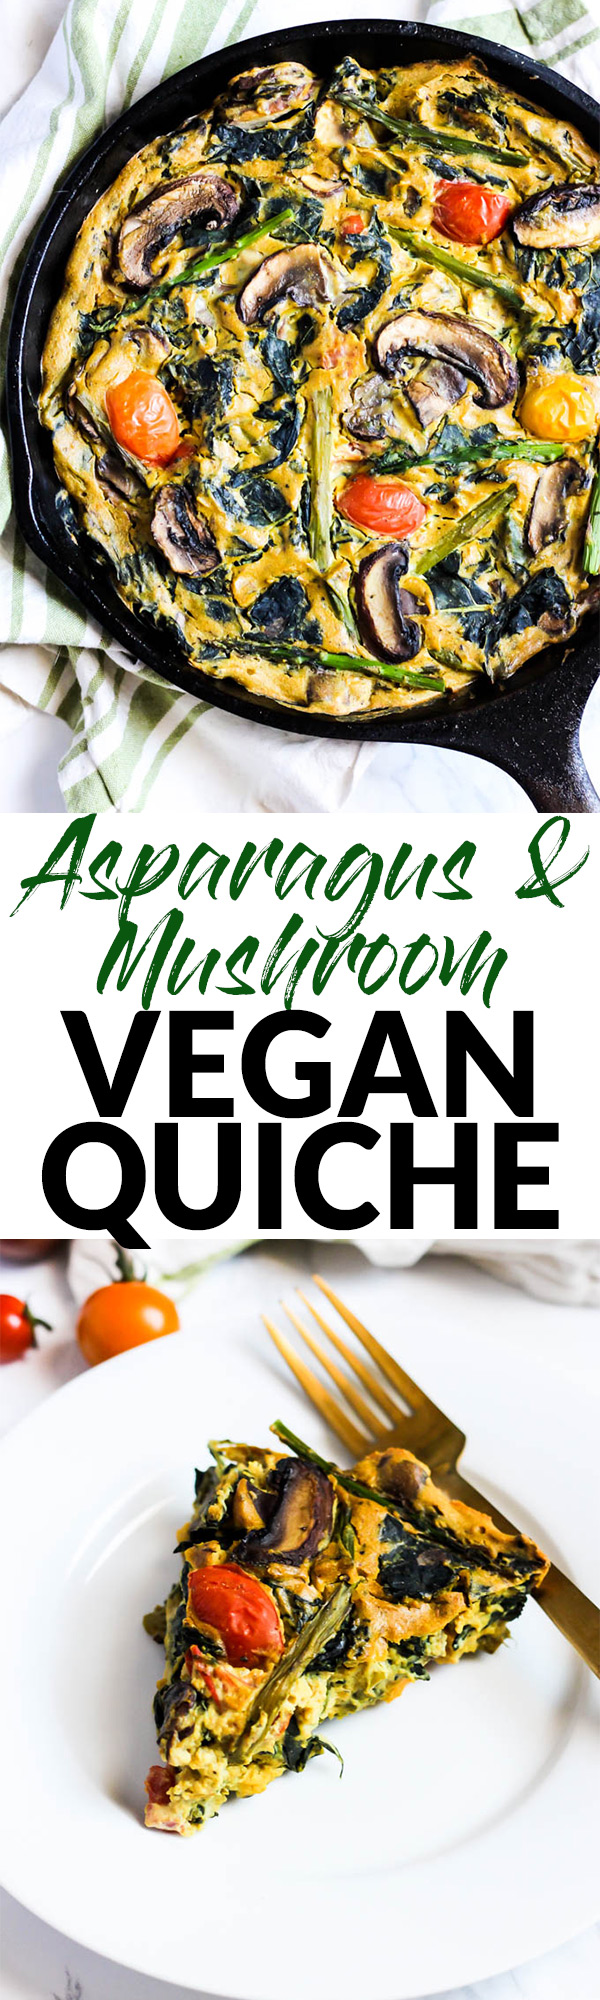 This Asparagus & Mushroom Vegan Quiche is a delicious option for breakfast or brunch! It's full of vegetables and plant protein to keep you satisfied.